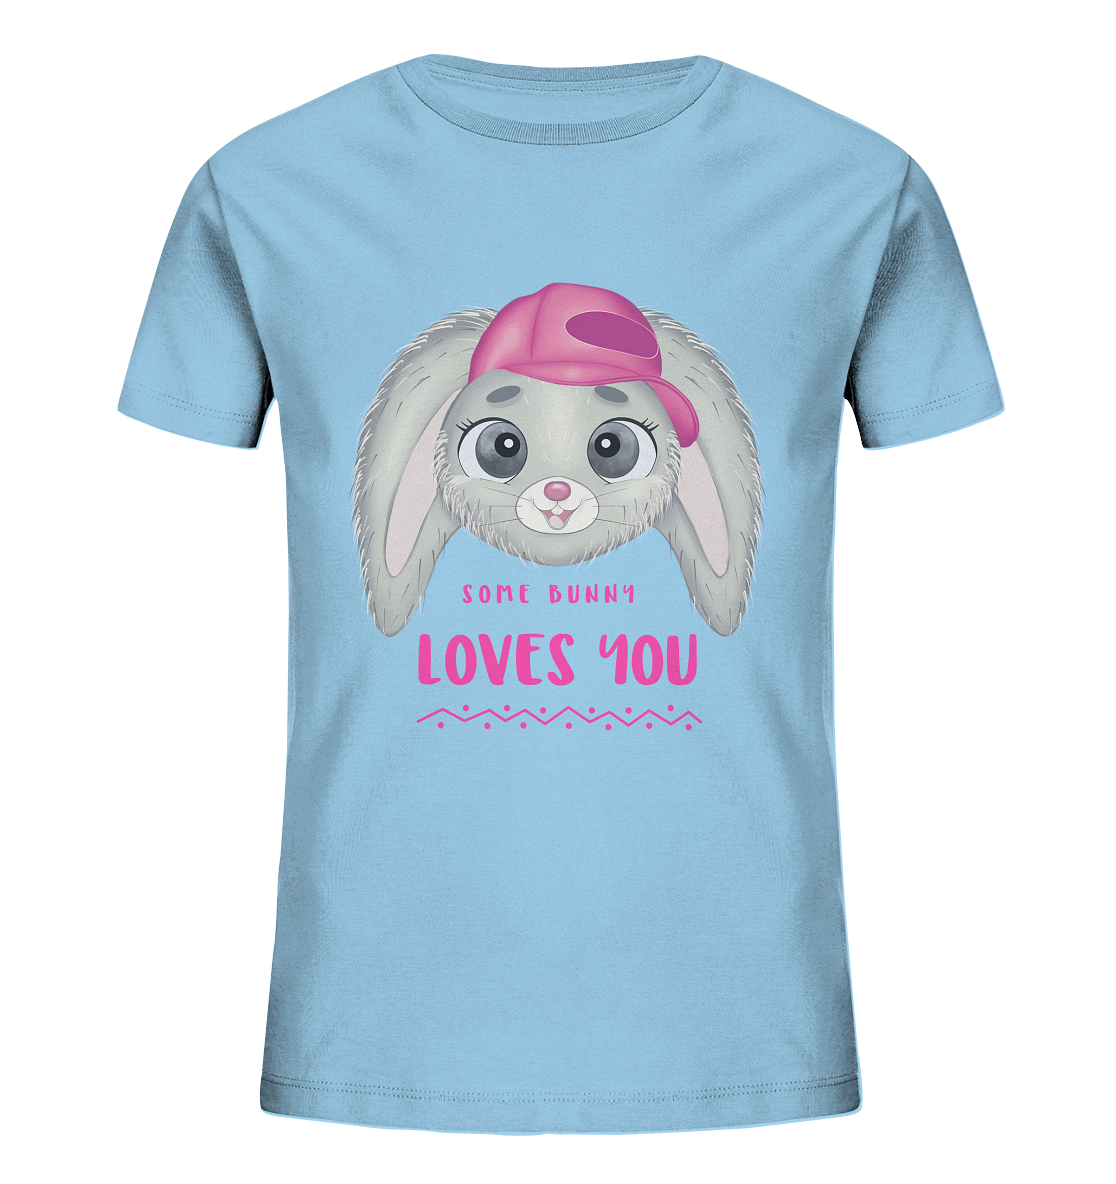 Süßes Cartoon Hase T-Shirt Some Bunny loves you Kinder T-Shirt in baby blau von Bloominic